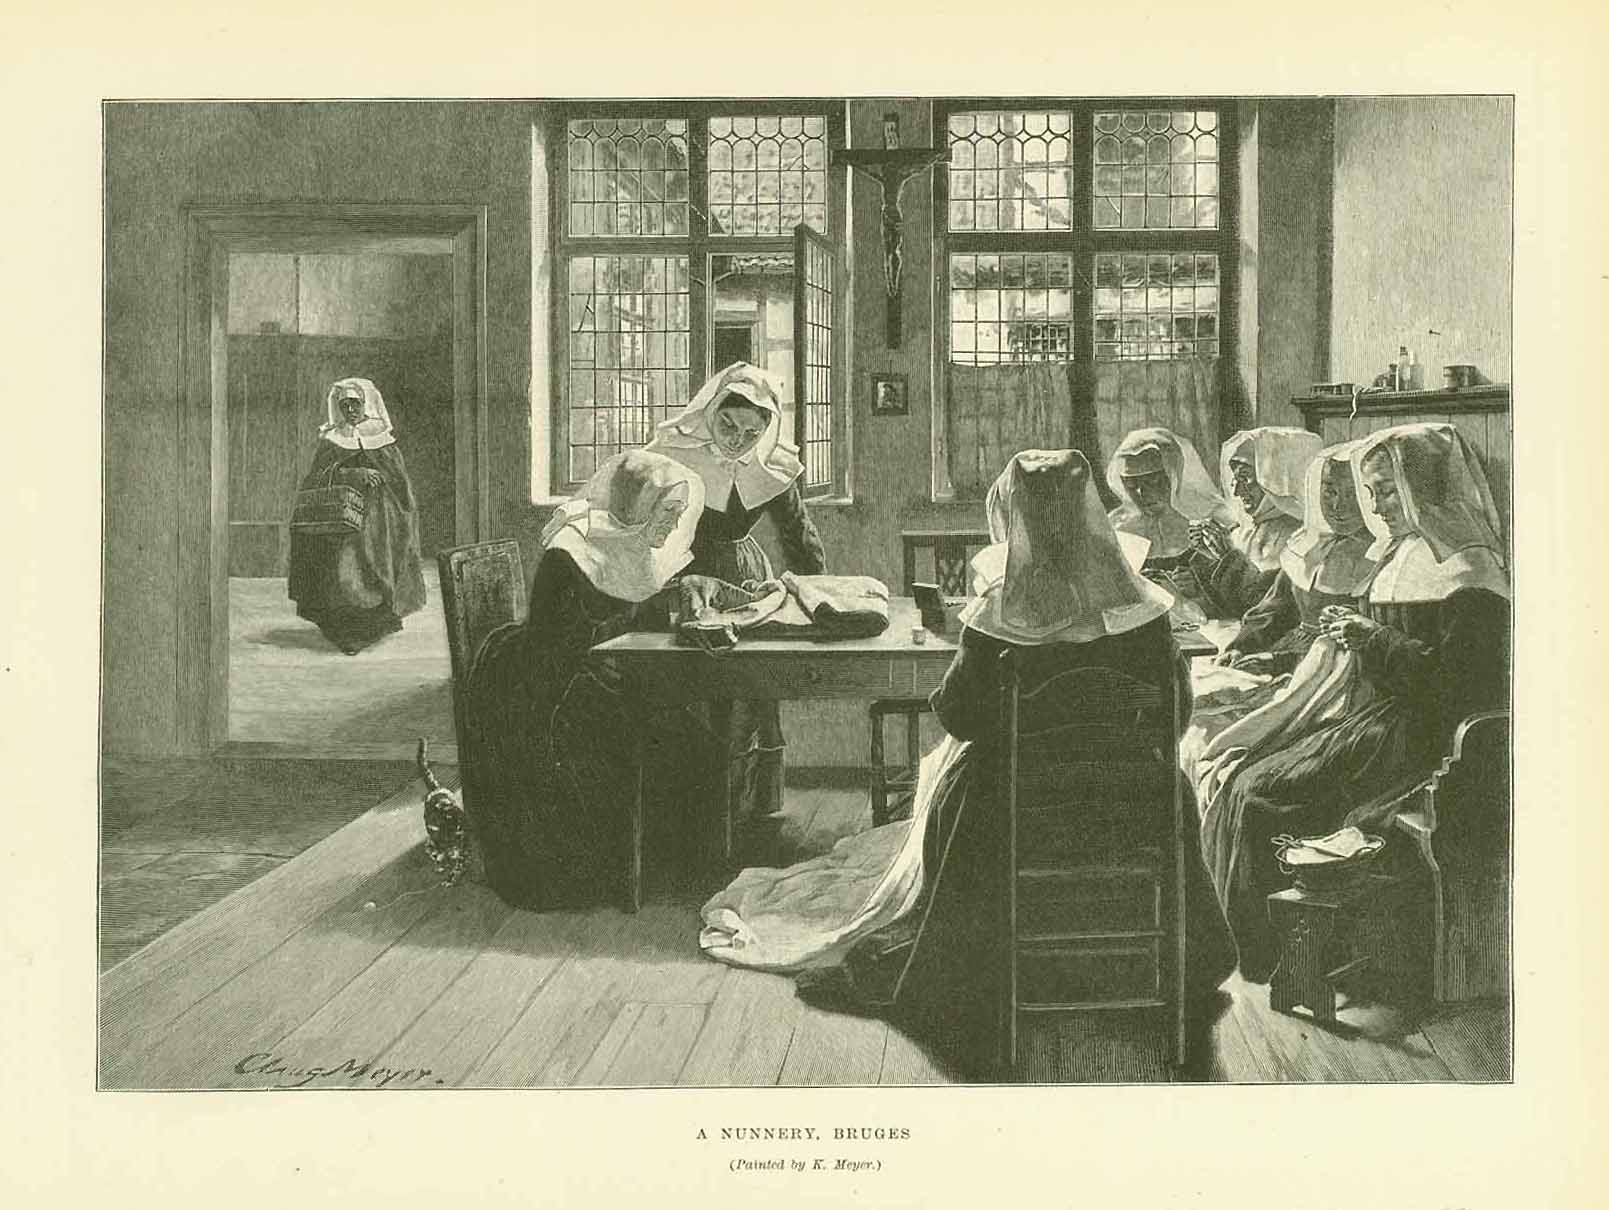 "A Nunnery, Bruges"  Wood engraving made after a painting by K. Meyer. Published 1895. Reverse side is printed.